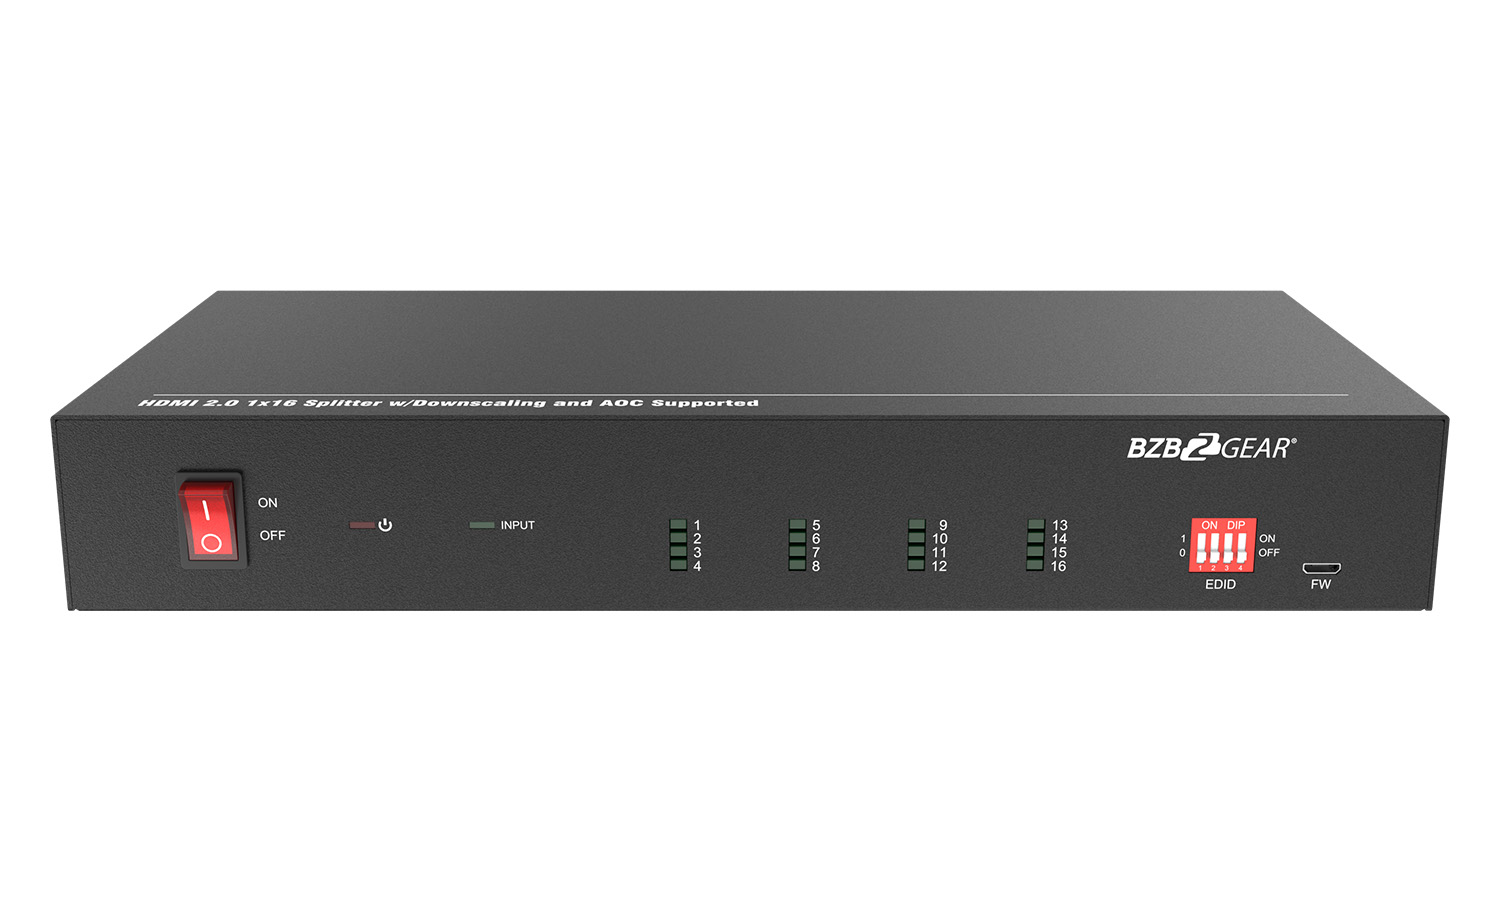 BZBGEAR BG-UHD-DA1X16 1x16 4K UHD HDMI Splitter/Distribution Amplifier with Downscaling and AOC Supported